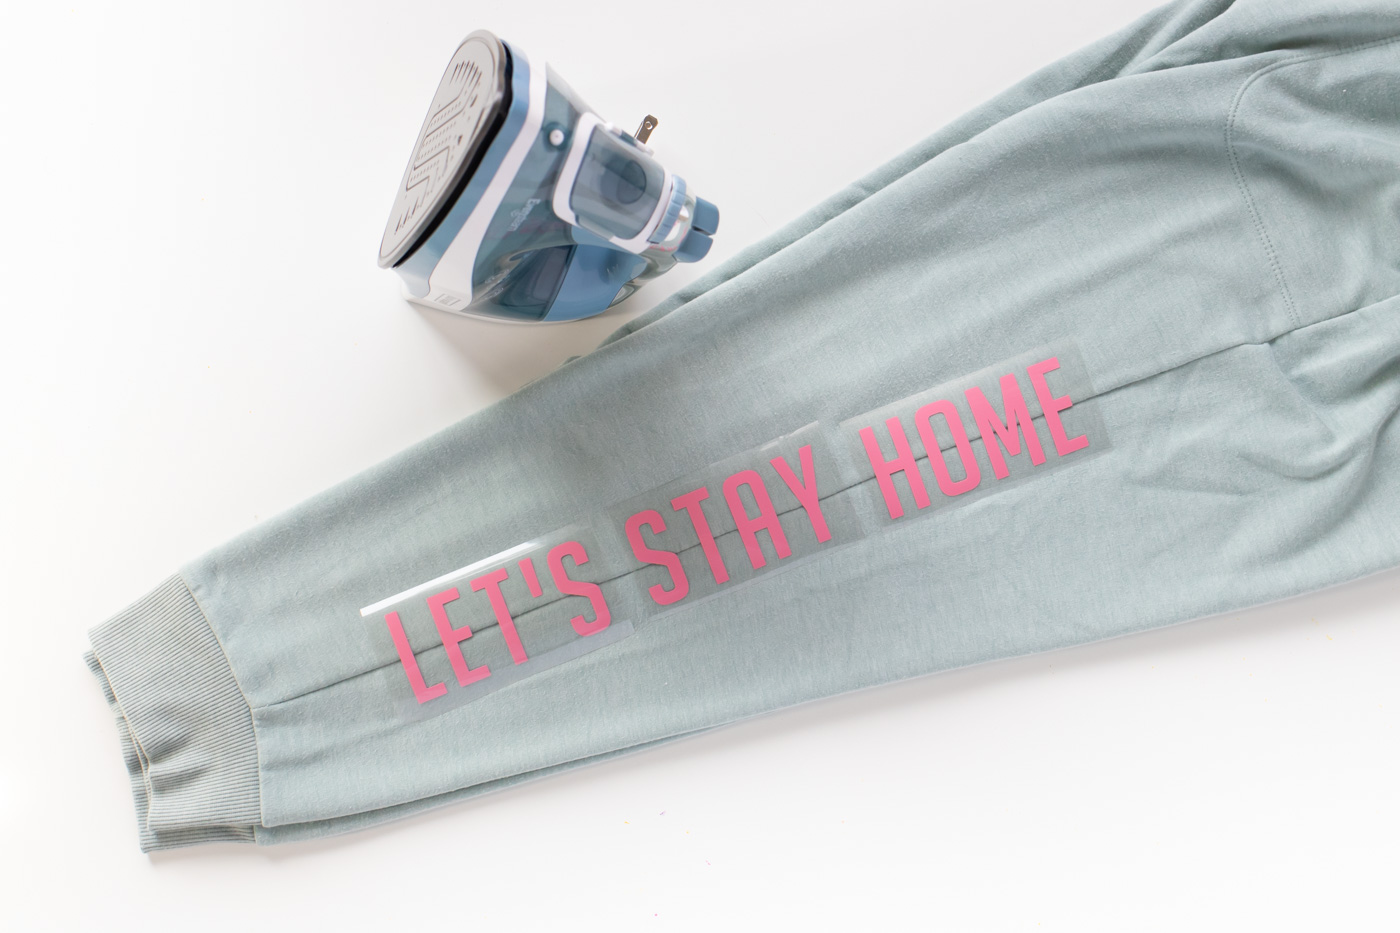 "Let's Stay Home" DIY Graphic Sweatpants with Iron-On Vinyl (Cricut) // Update a pair of plain sweats with a cute saying using vinyl! #cricutmade #ironon #vinyl #fashion #diyfashion #nosew #sweatpants #womensstyle #stylediy